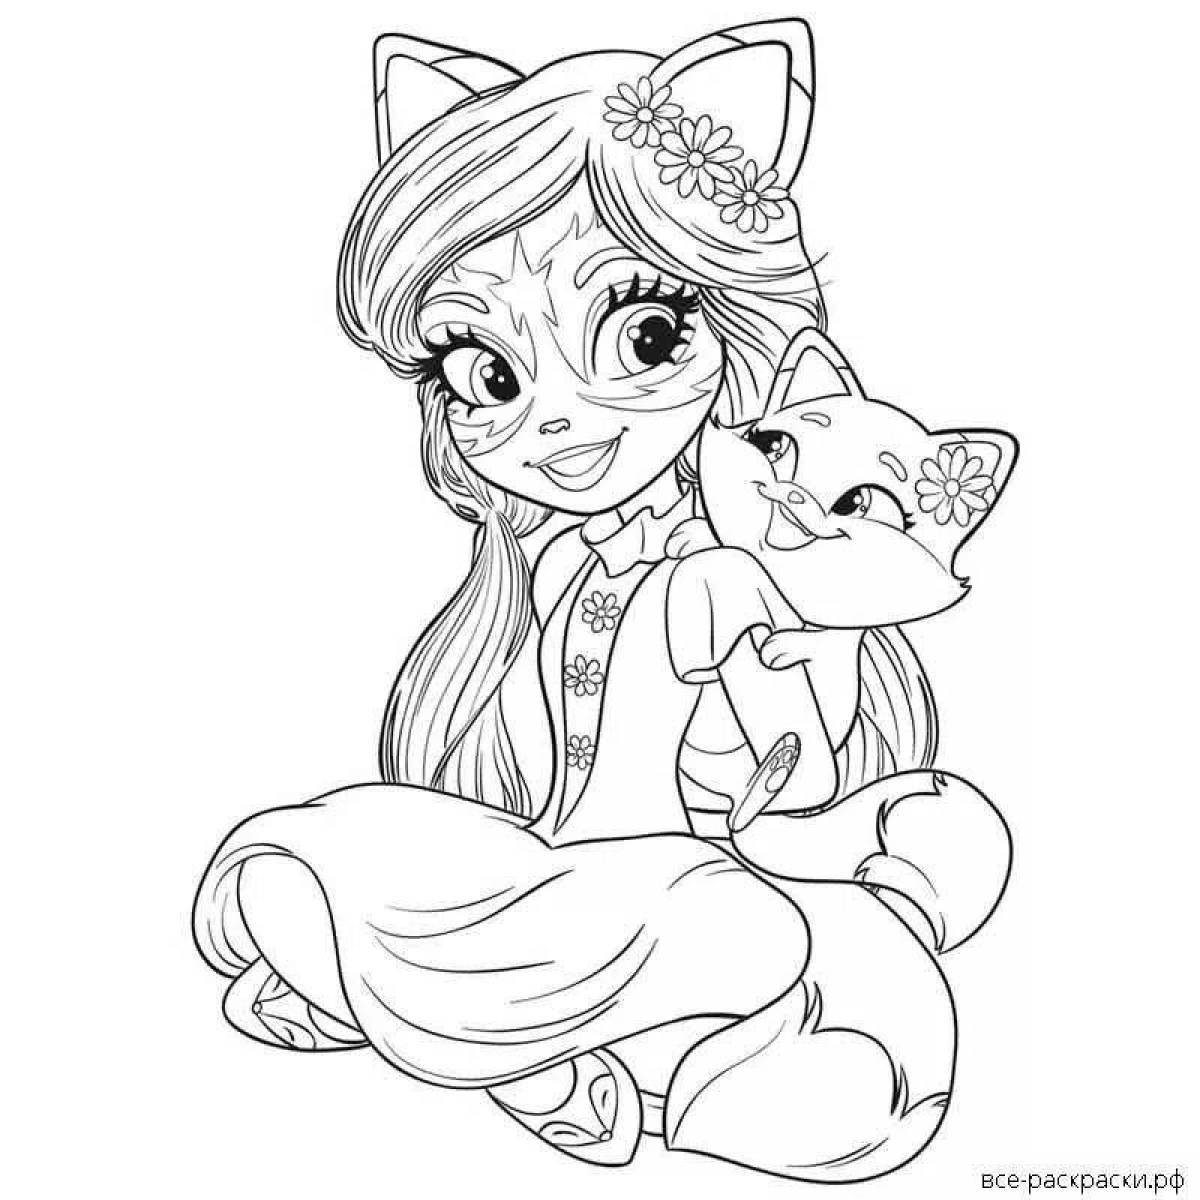 Charming spell coloring page